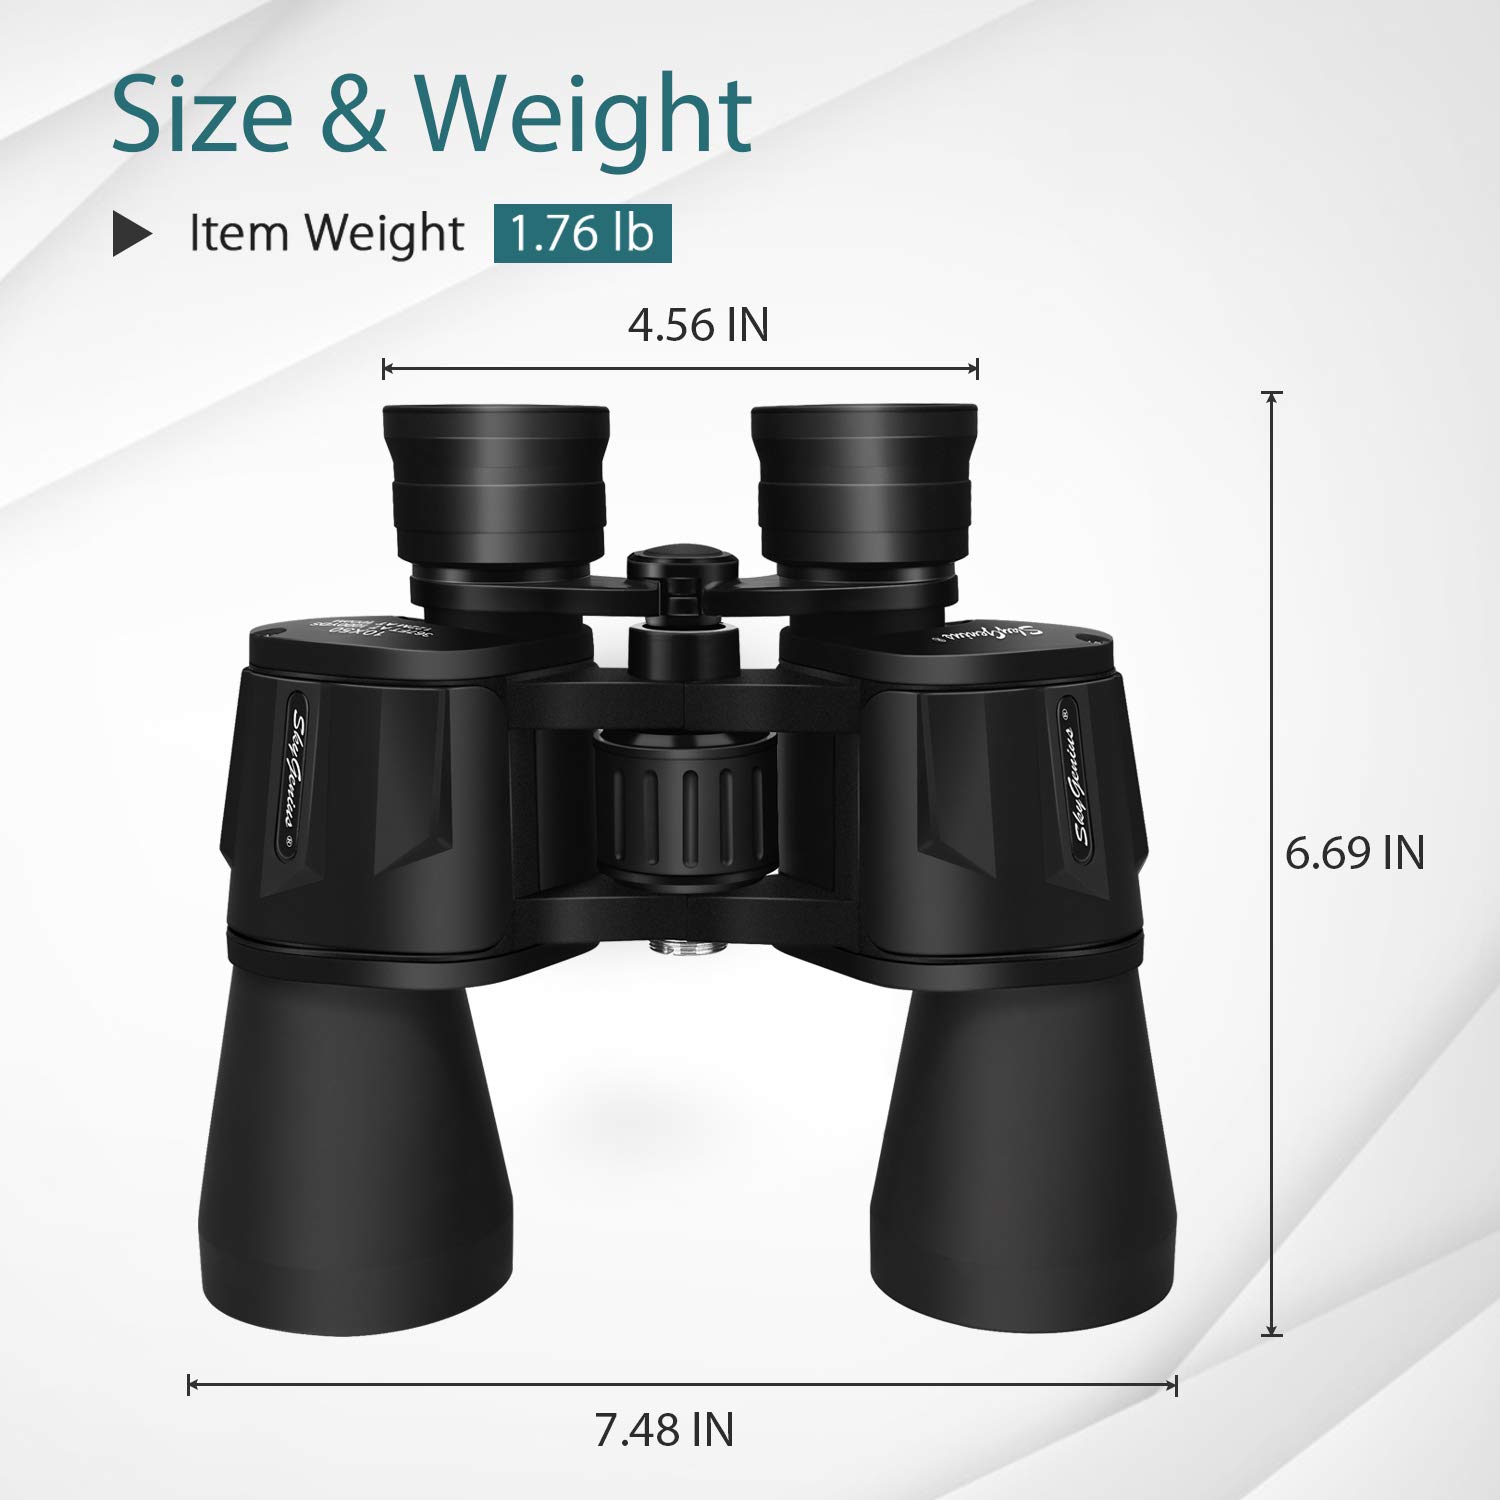 SkyGenius 10 x 50 Binoculars for Adults Powerful Full-Size, Clear Durable Binoculars for Bird Watching Sightseeing Wildlife Watching Traveling Stargazing with Low Light Night Vision